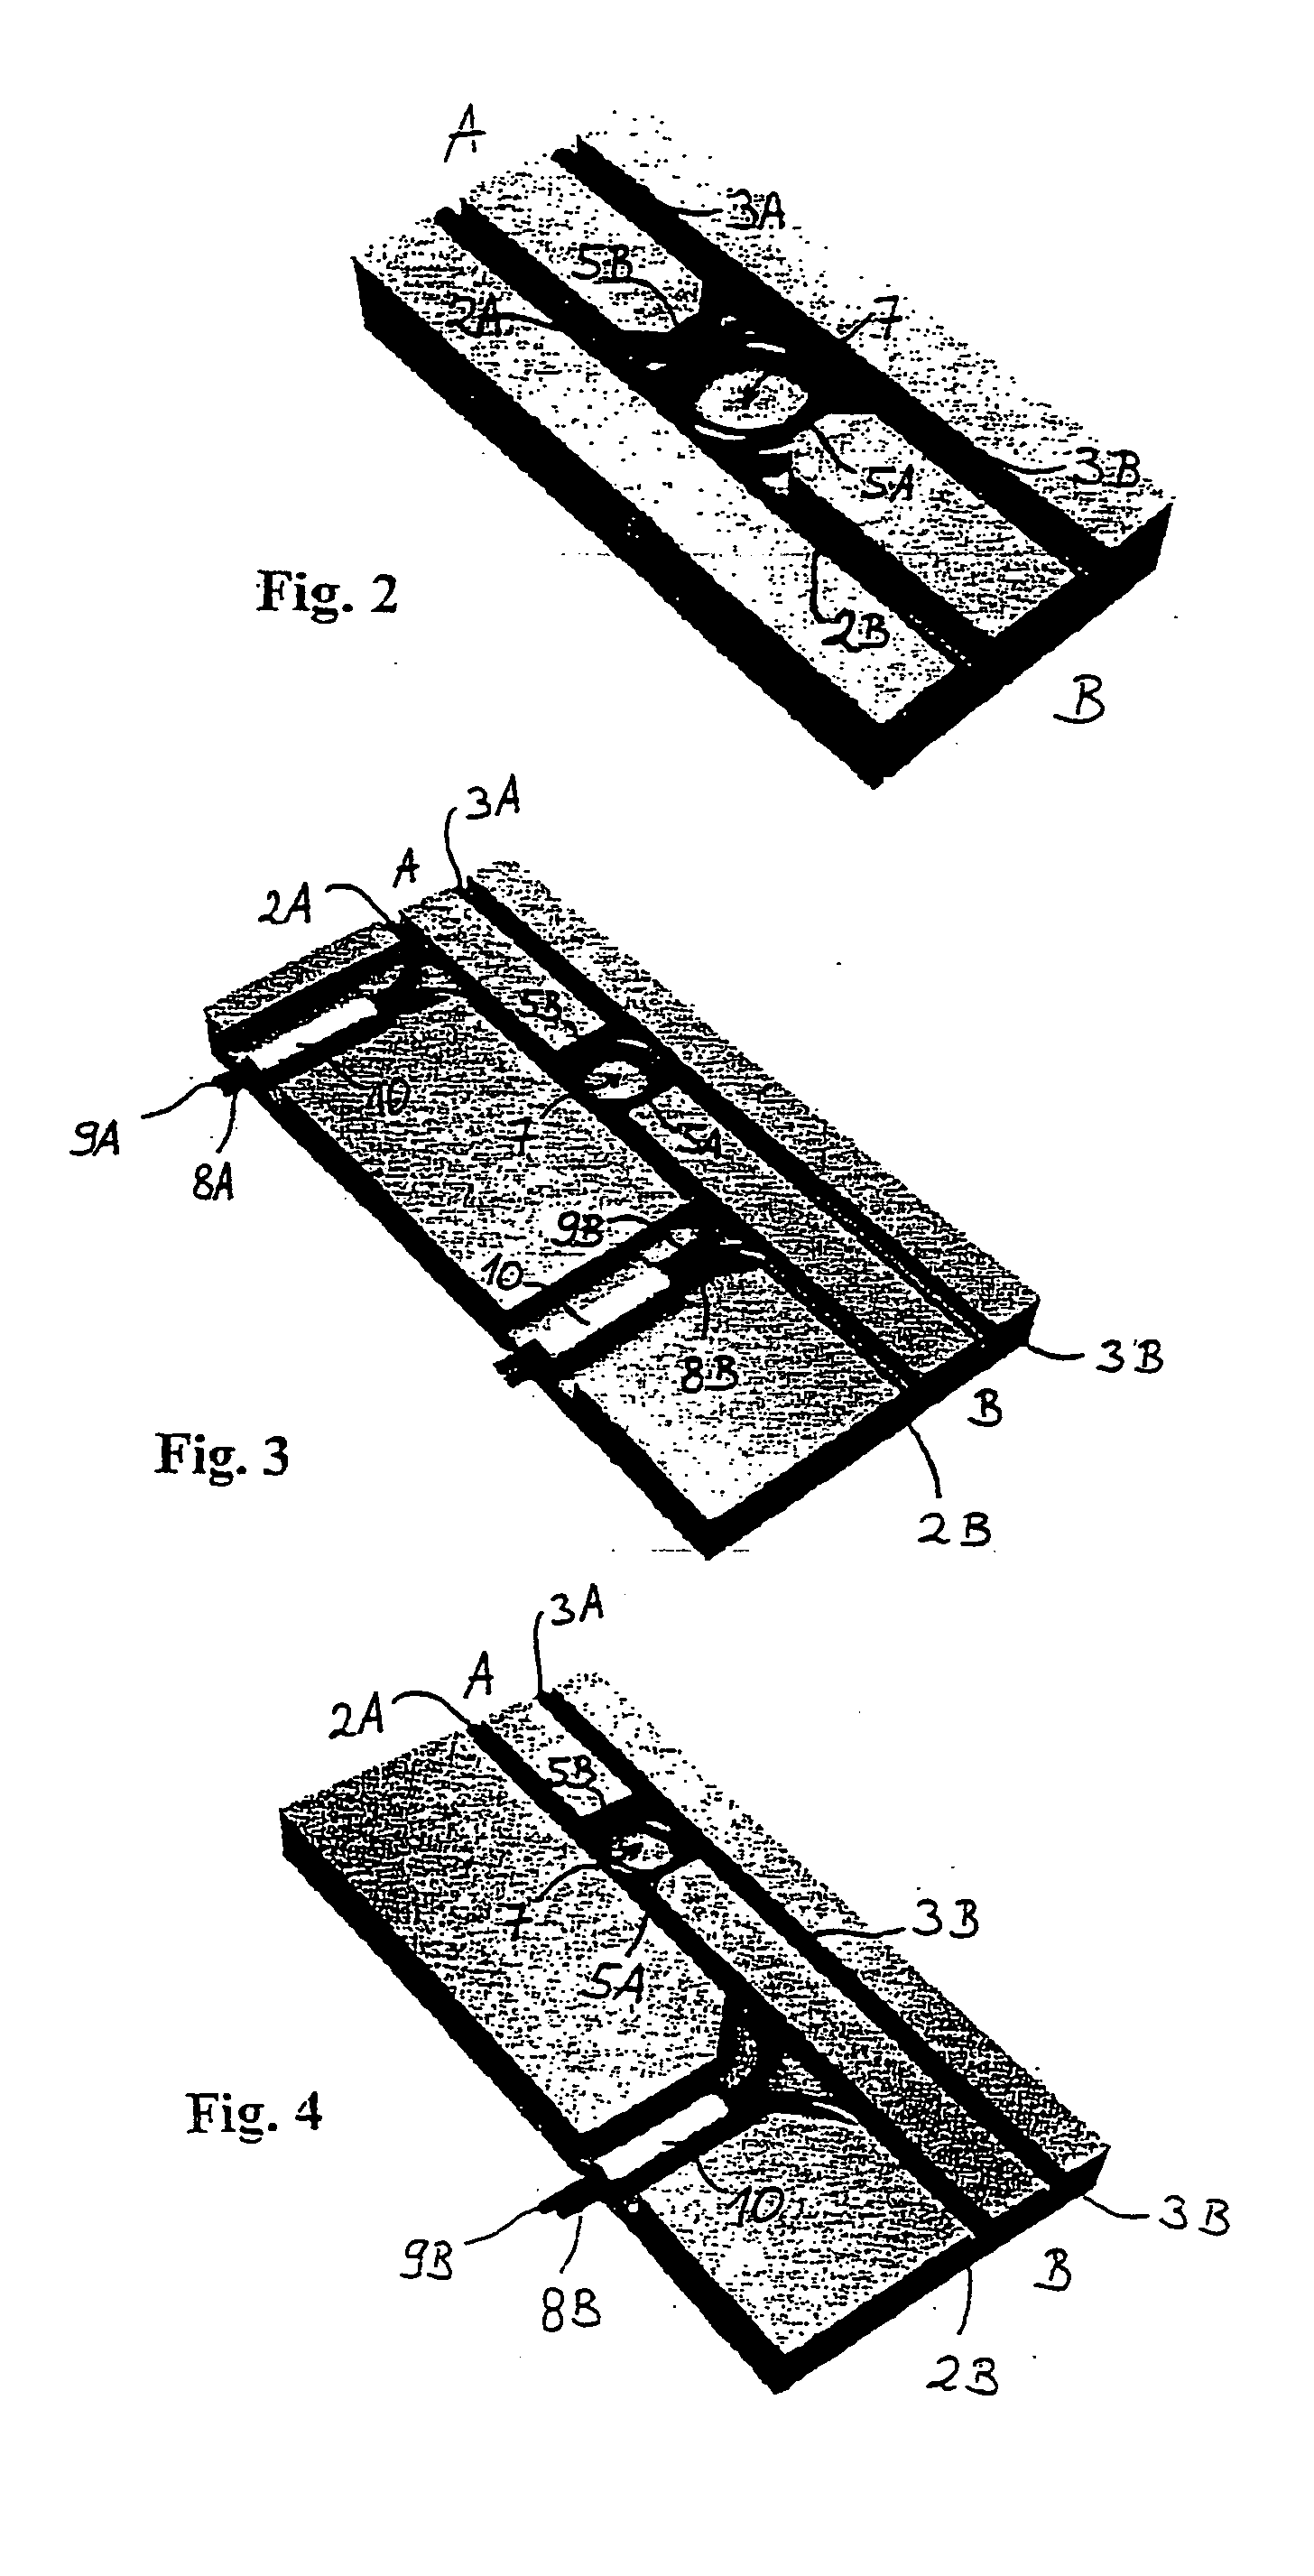 Primary conductor arrangement for a system for the inductive transmission of electrical energy